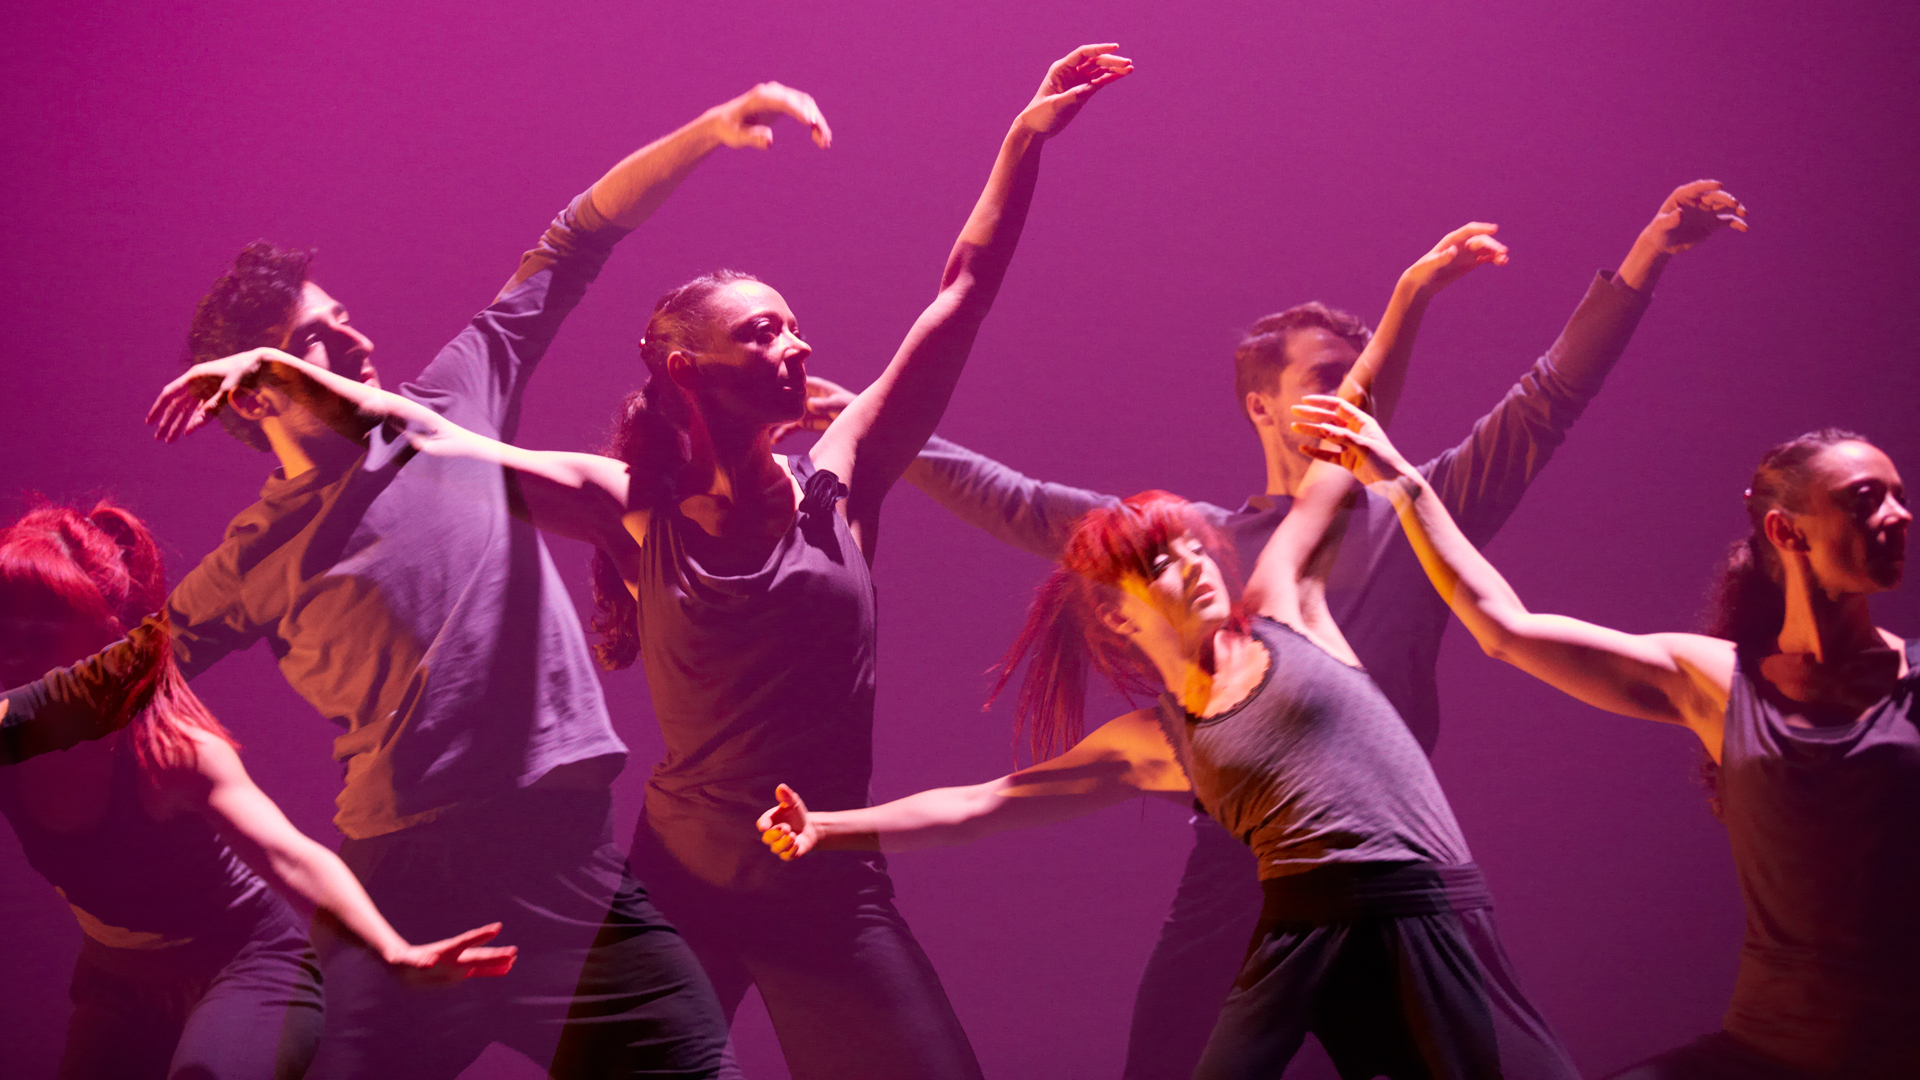 Six dancers in gray shirts and black pants hold their arms up in an "L" shape against a purple background